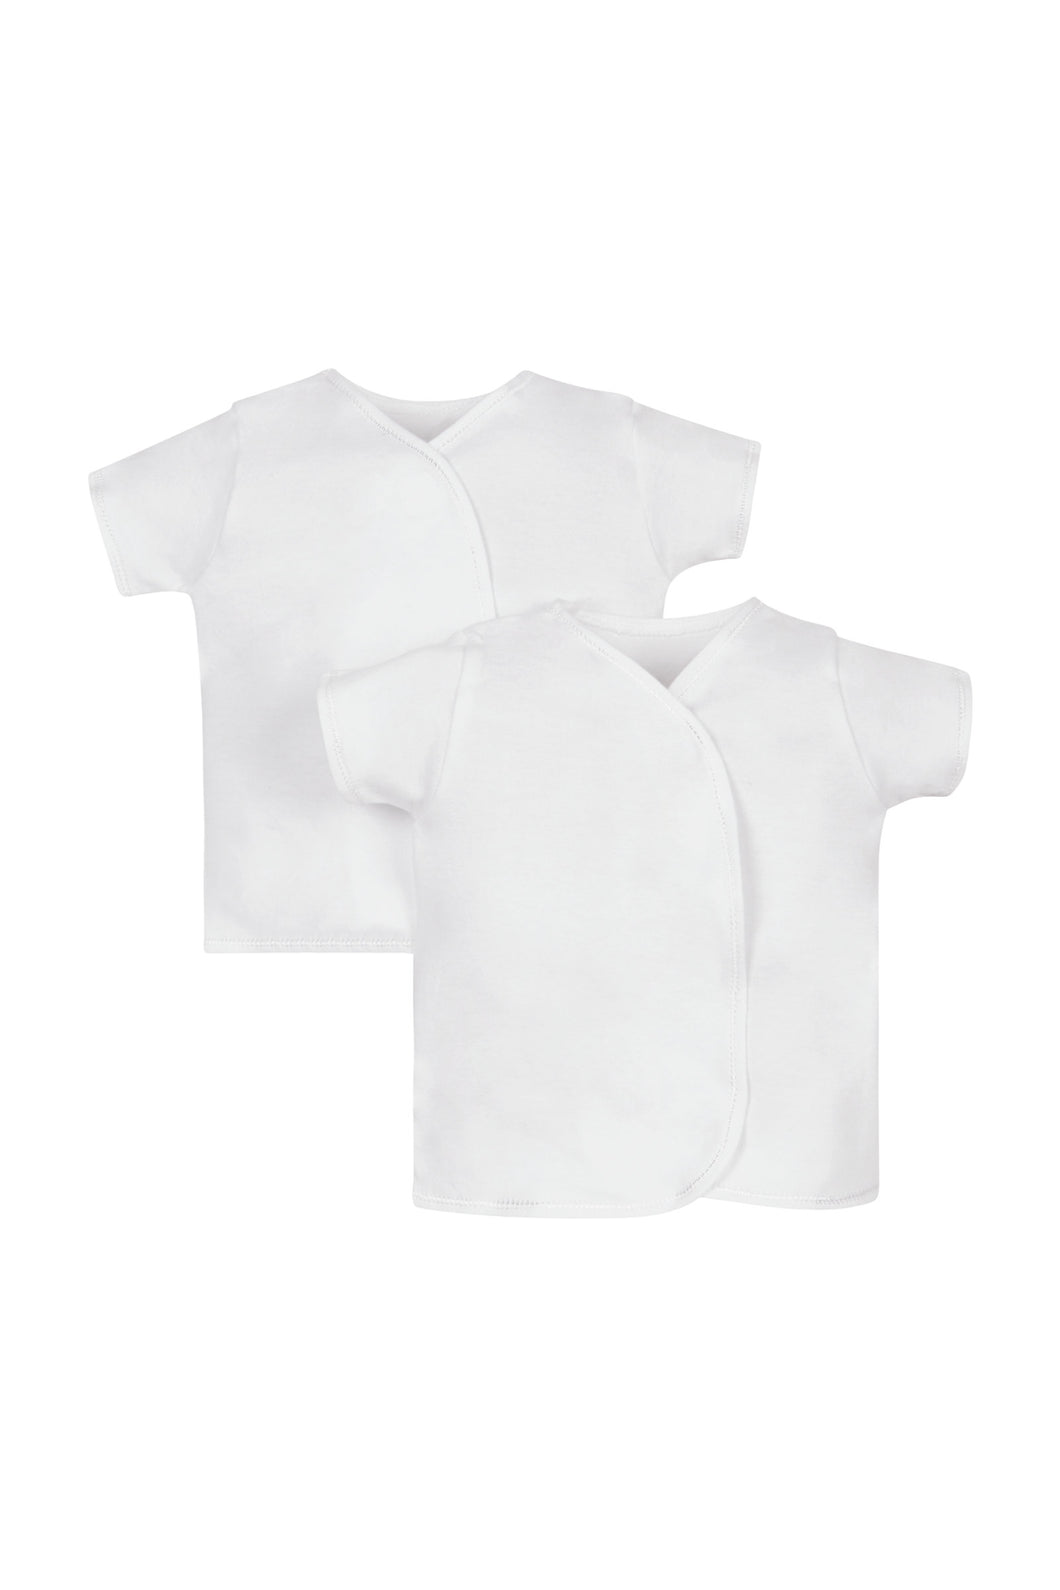 Mothercare My First Short Sleeve Wrap Vests â€“ 2 Pack